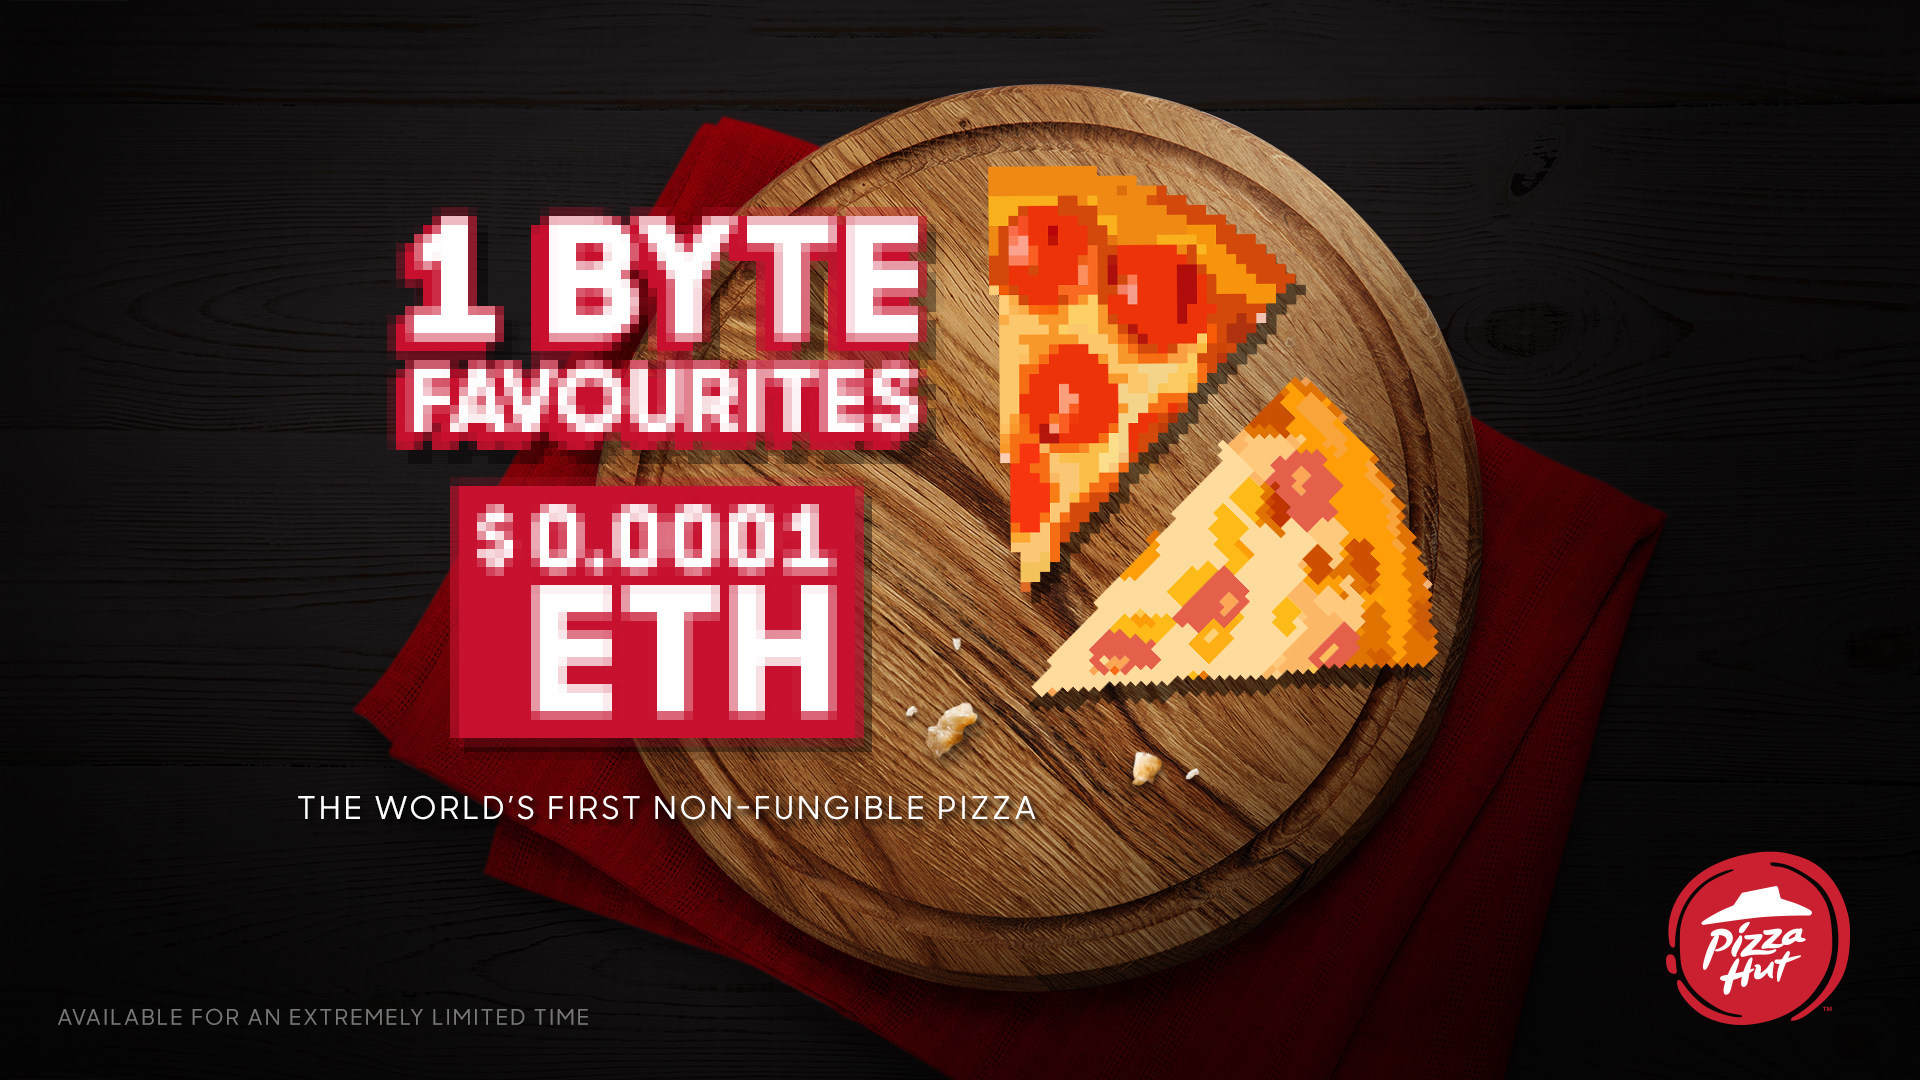 A pixelated image of two slices of pepperoni pizza on a wooden board, styled like an early video game with the text “1 Byte Favourites, $0.0001 ETH”